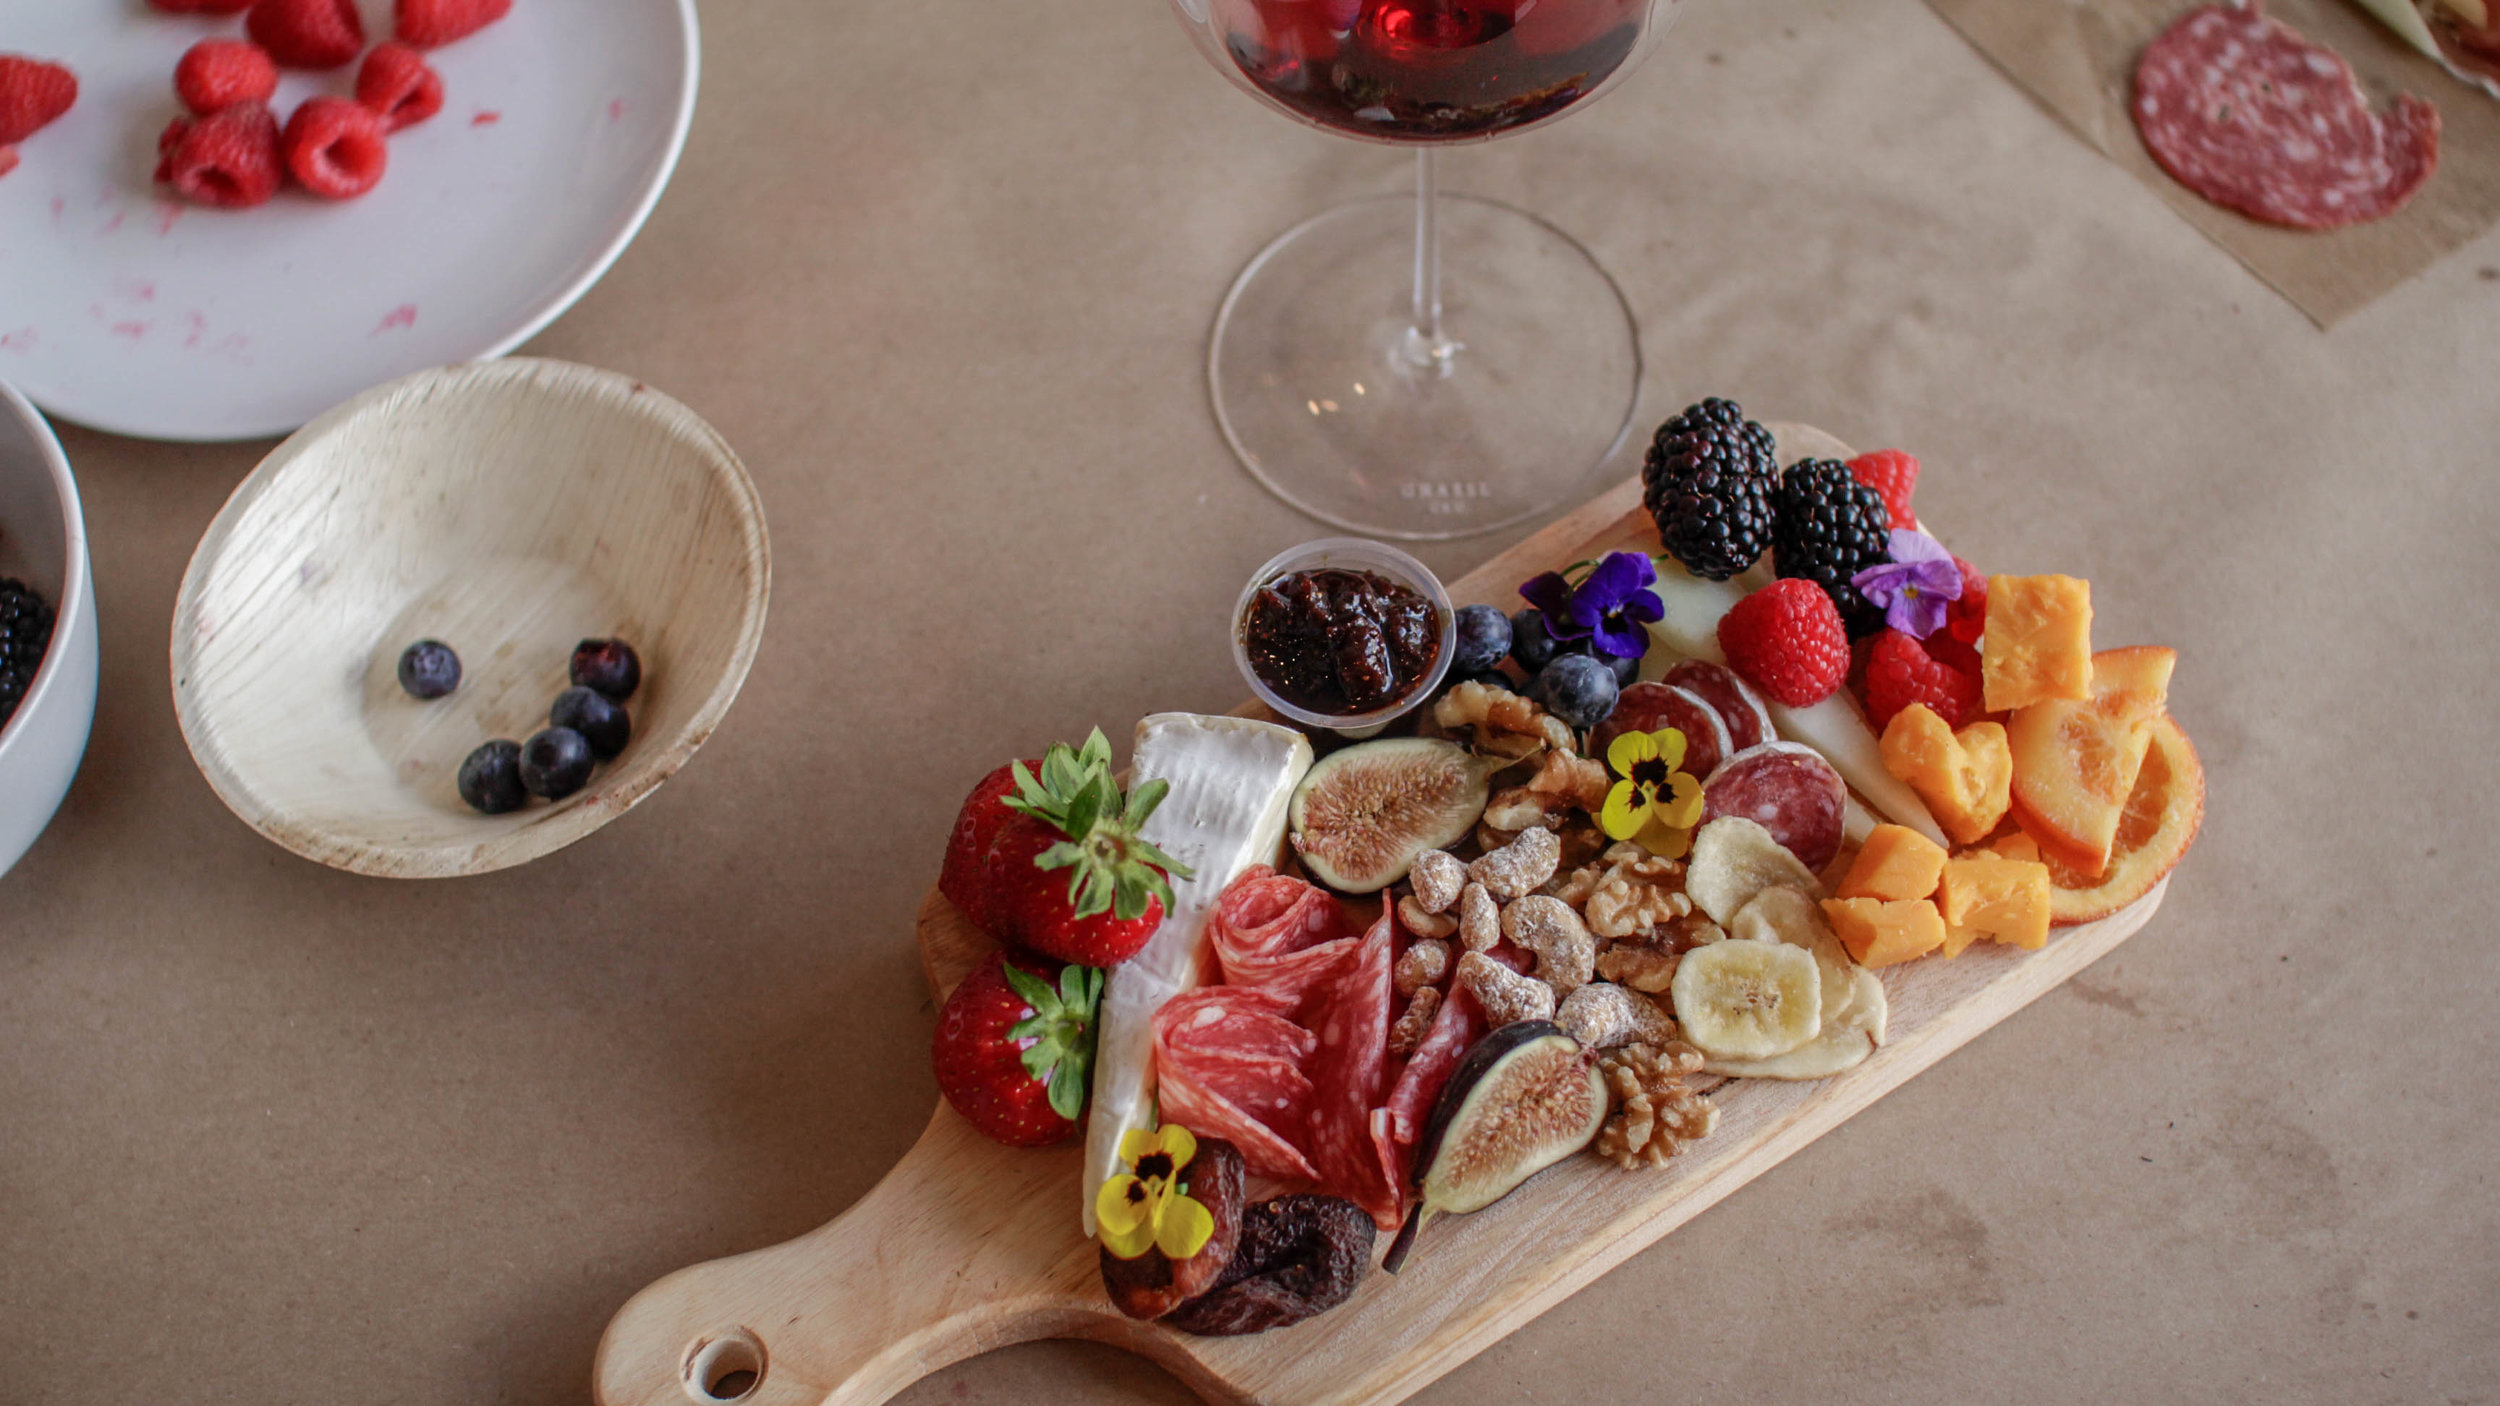 Stunning charcuterie board assembly and photography